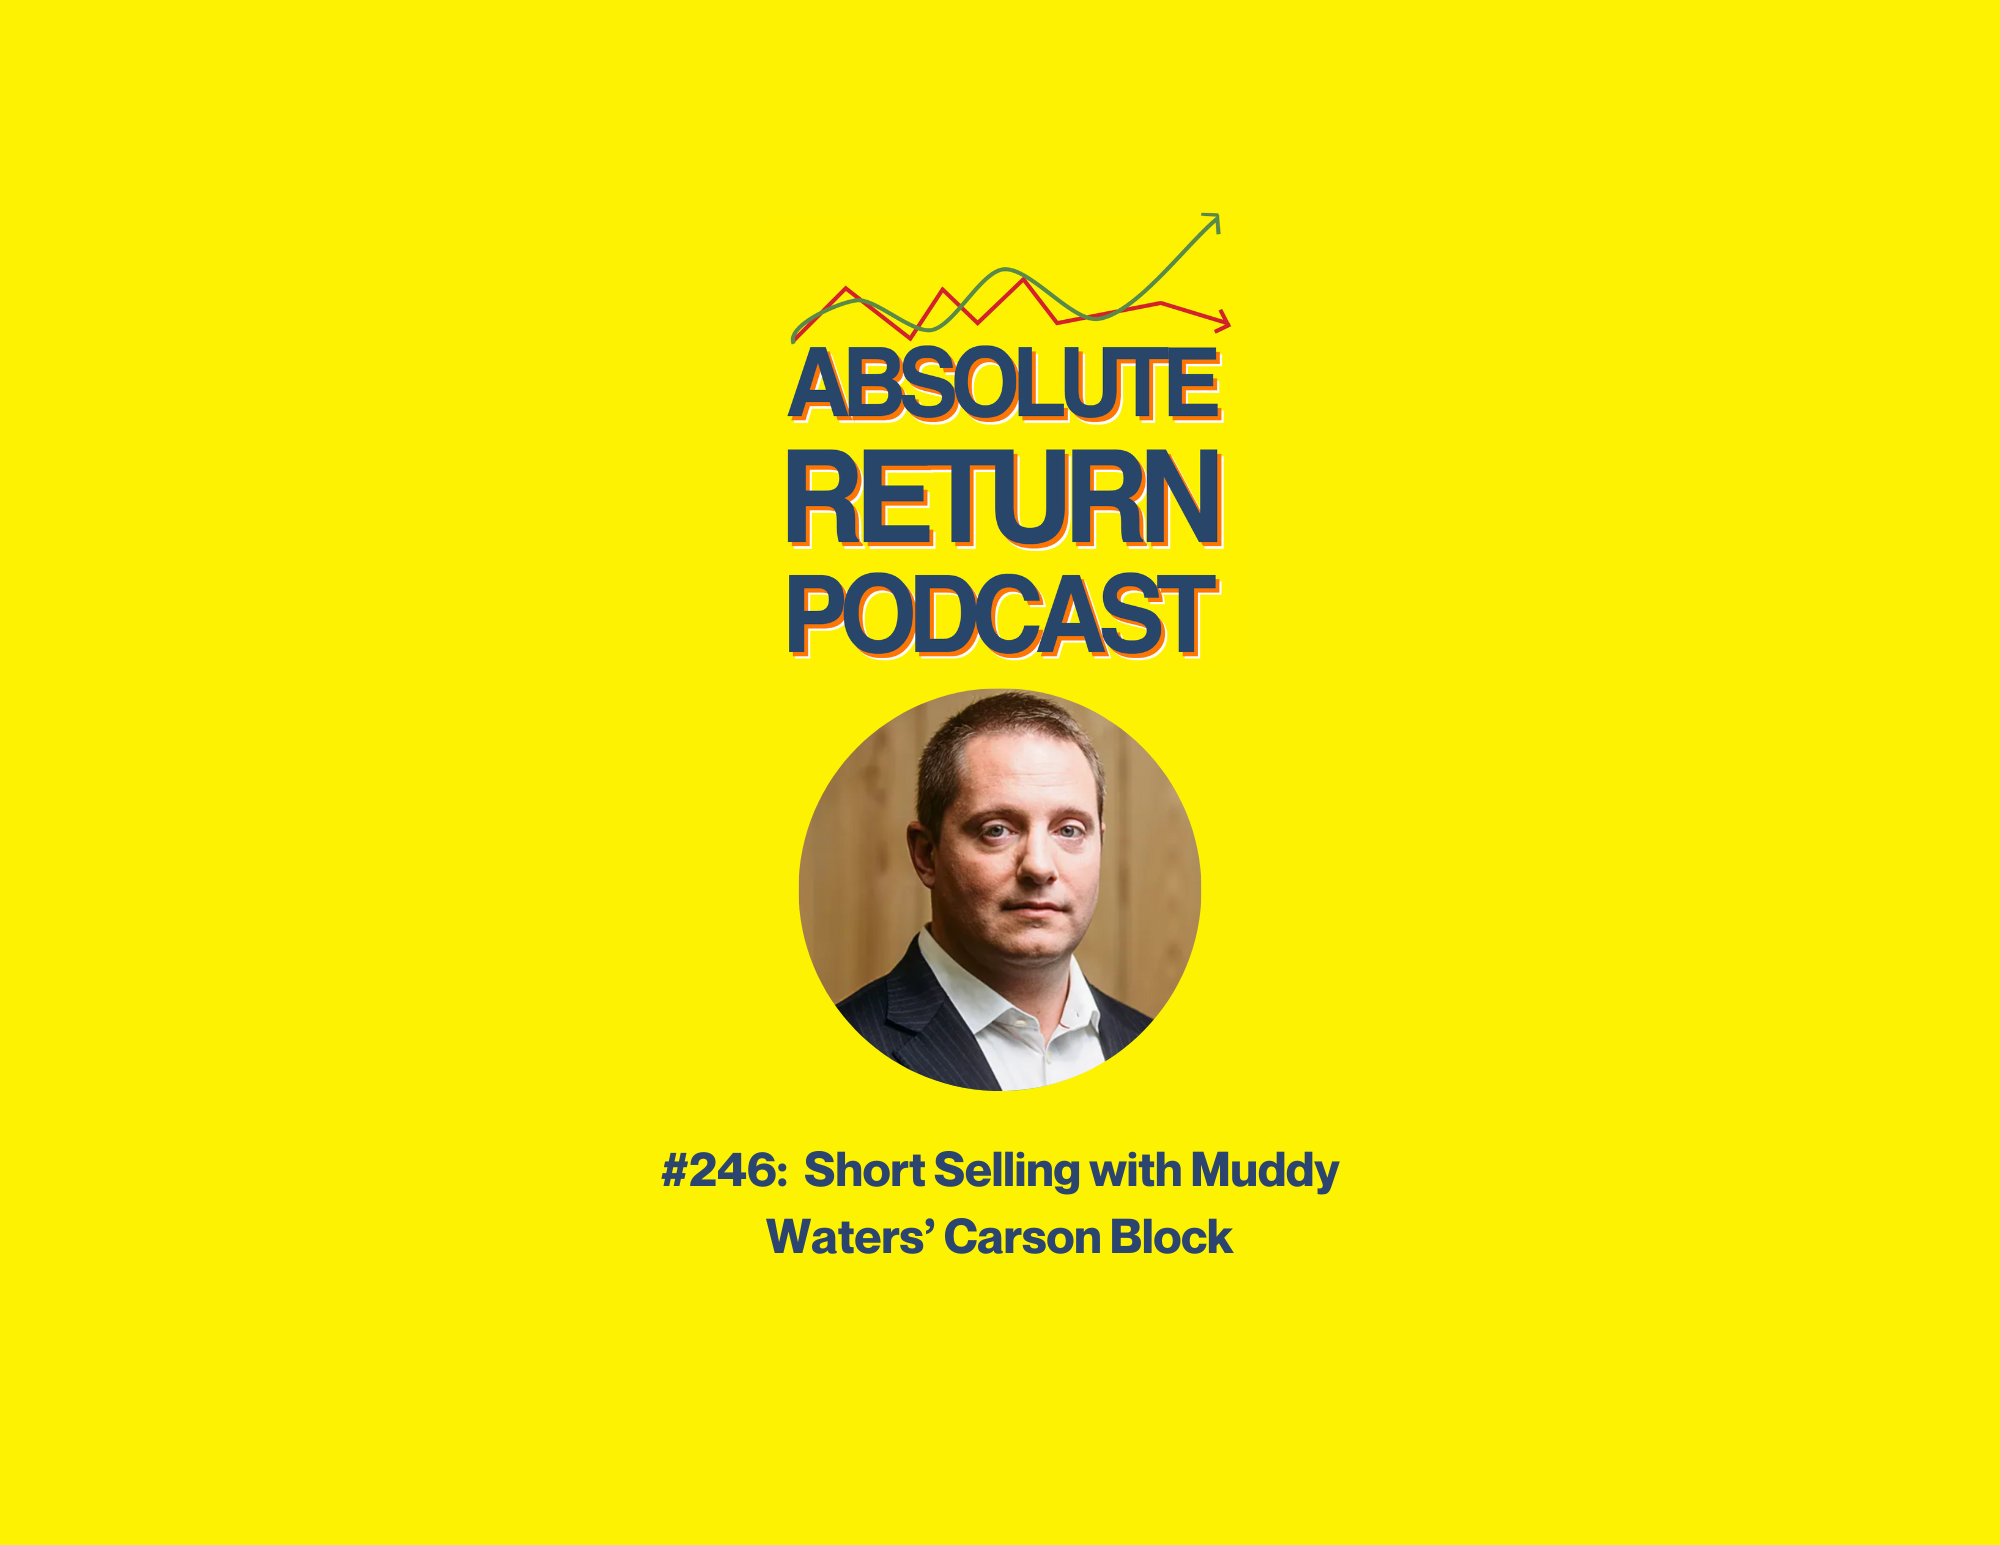 Absolute Return Podcast #246: Short Selling with Muddy Waters’ Carson Block